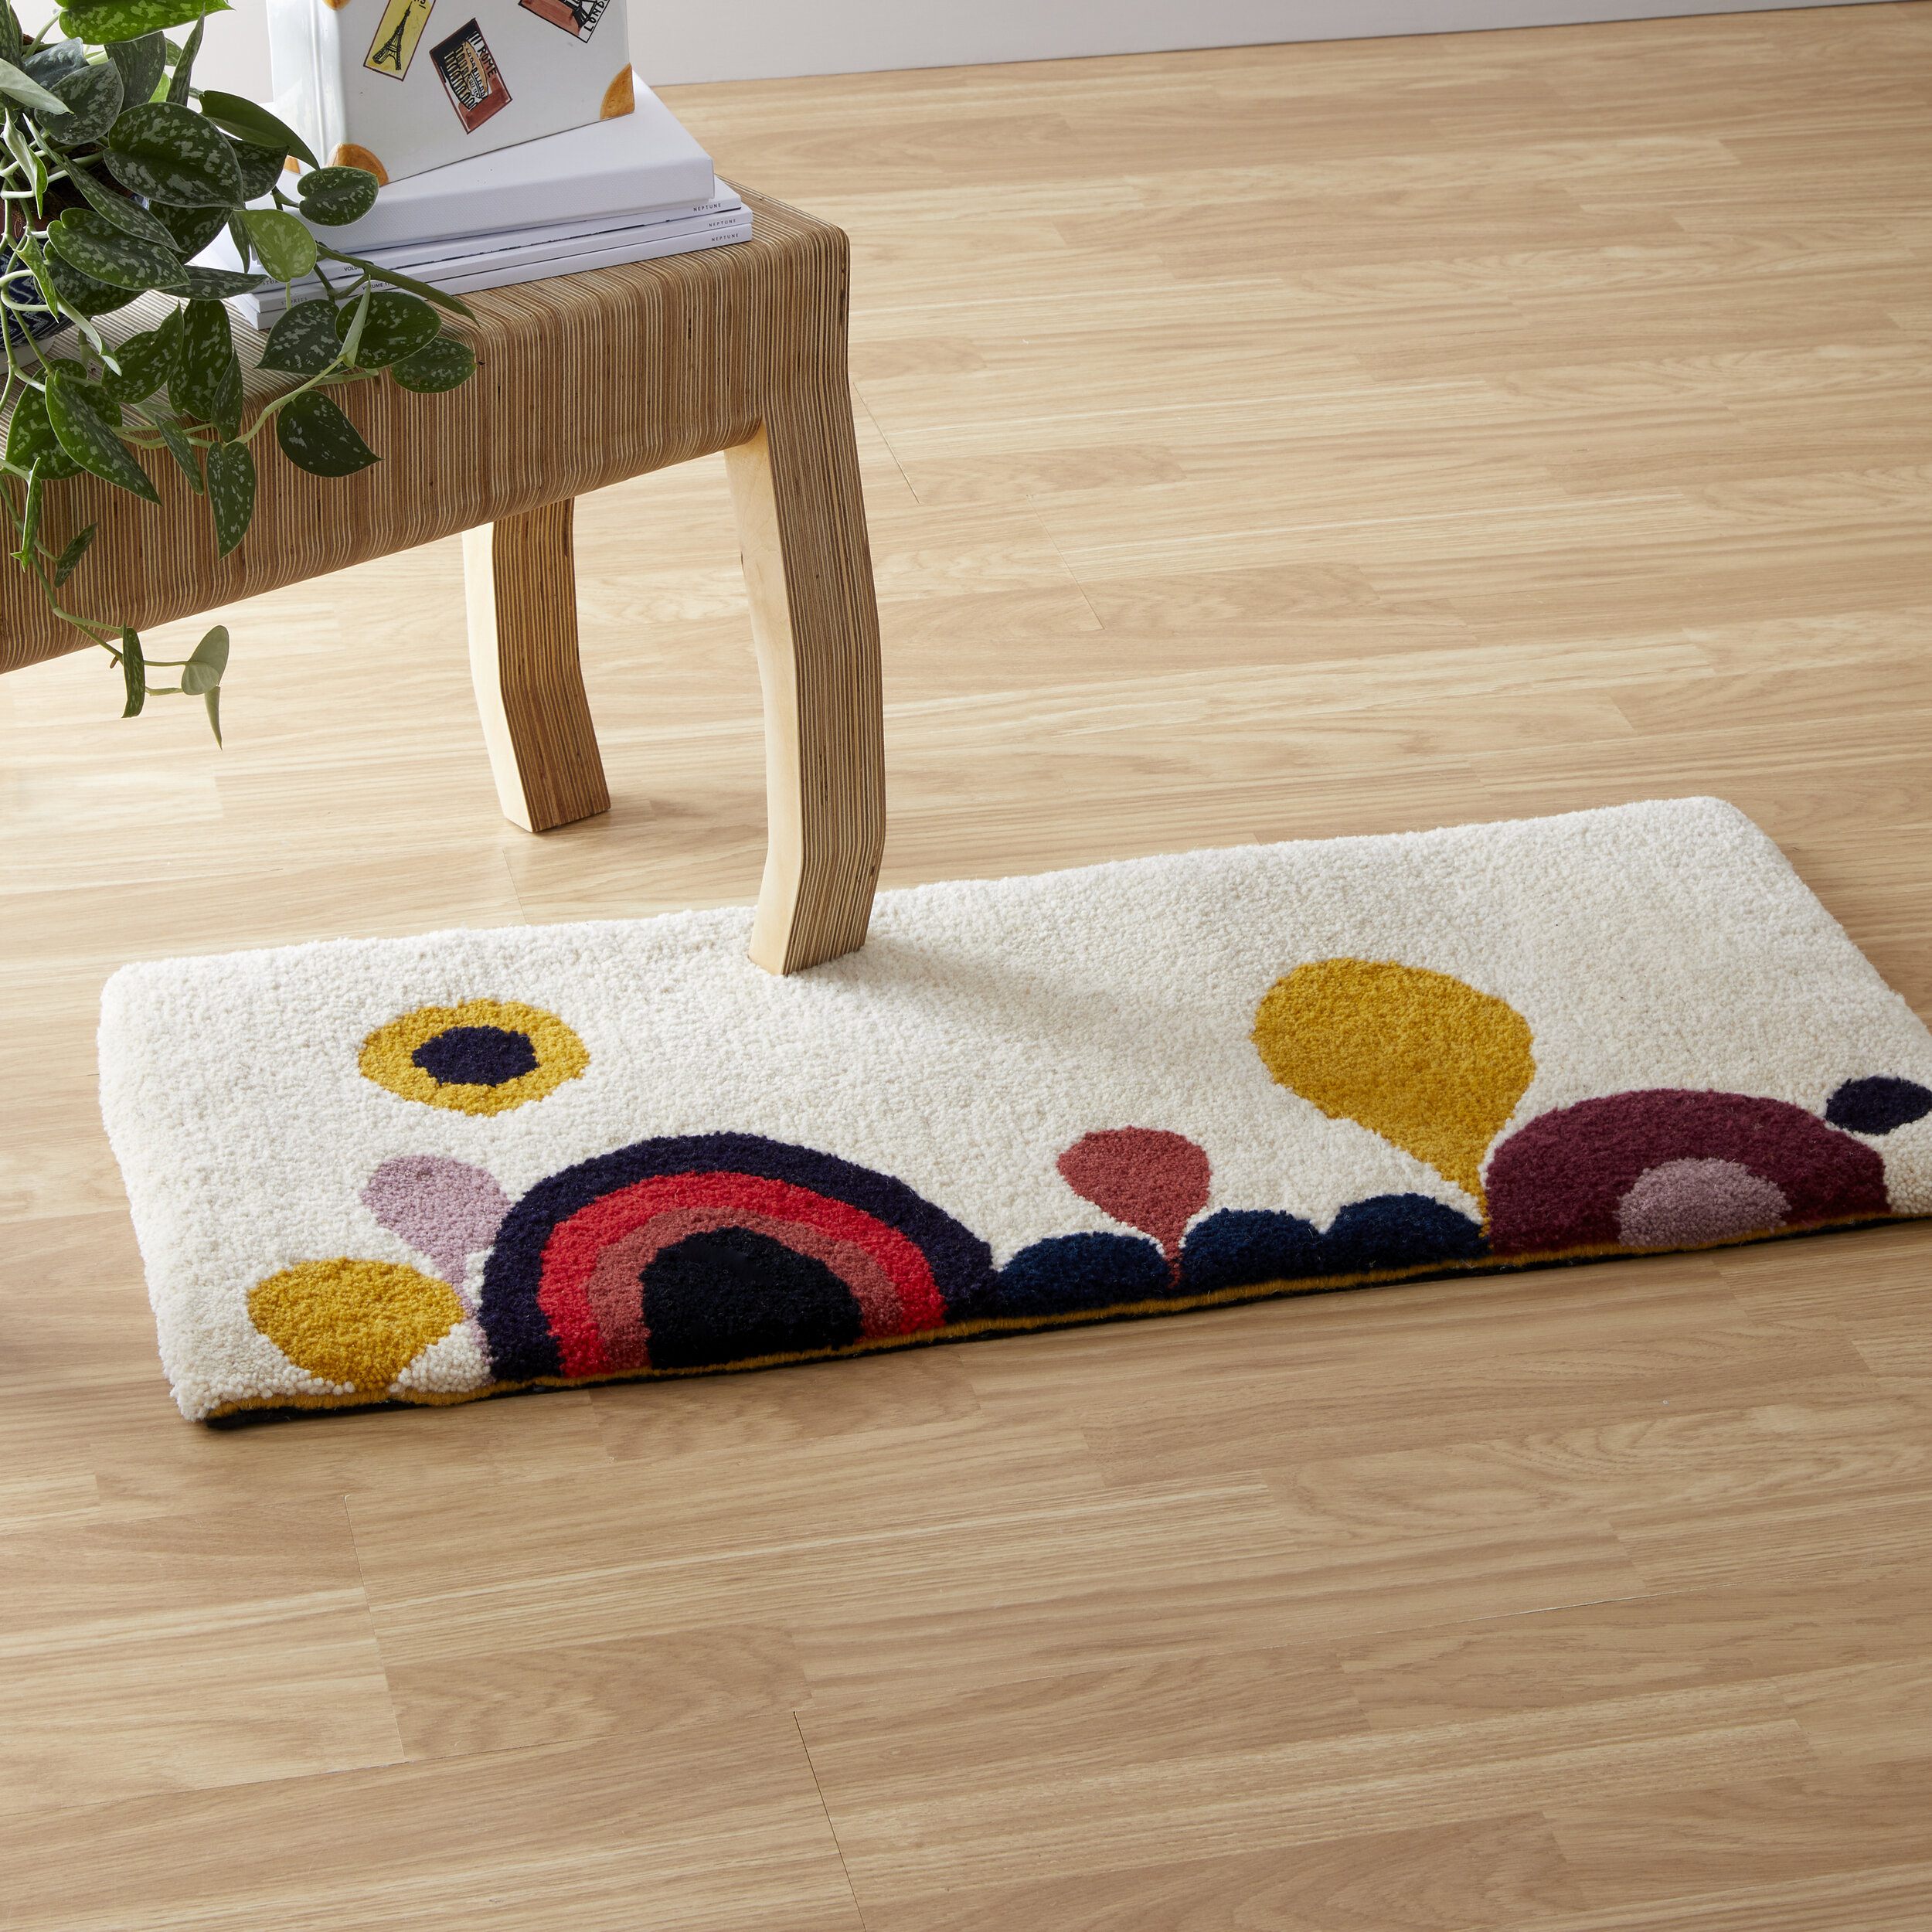 CANDYLAND RUG RUNNER - PHOTOGRAPHY &amp; STYLING BY  LUMA CONTENT